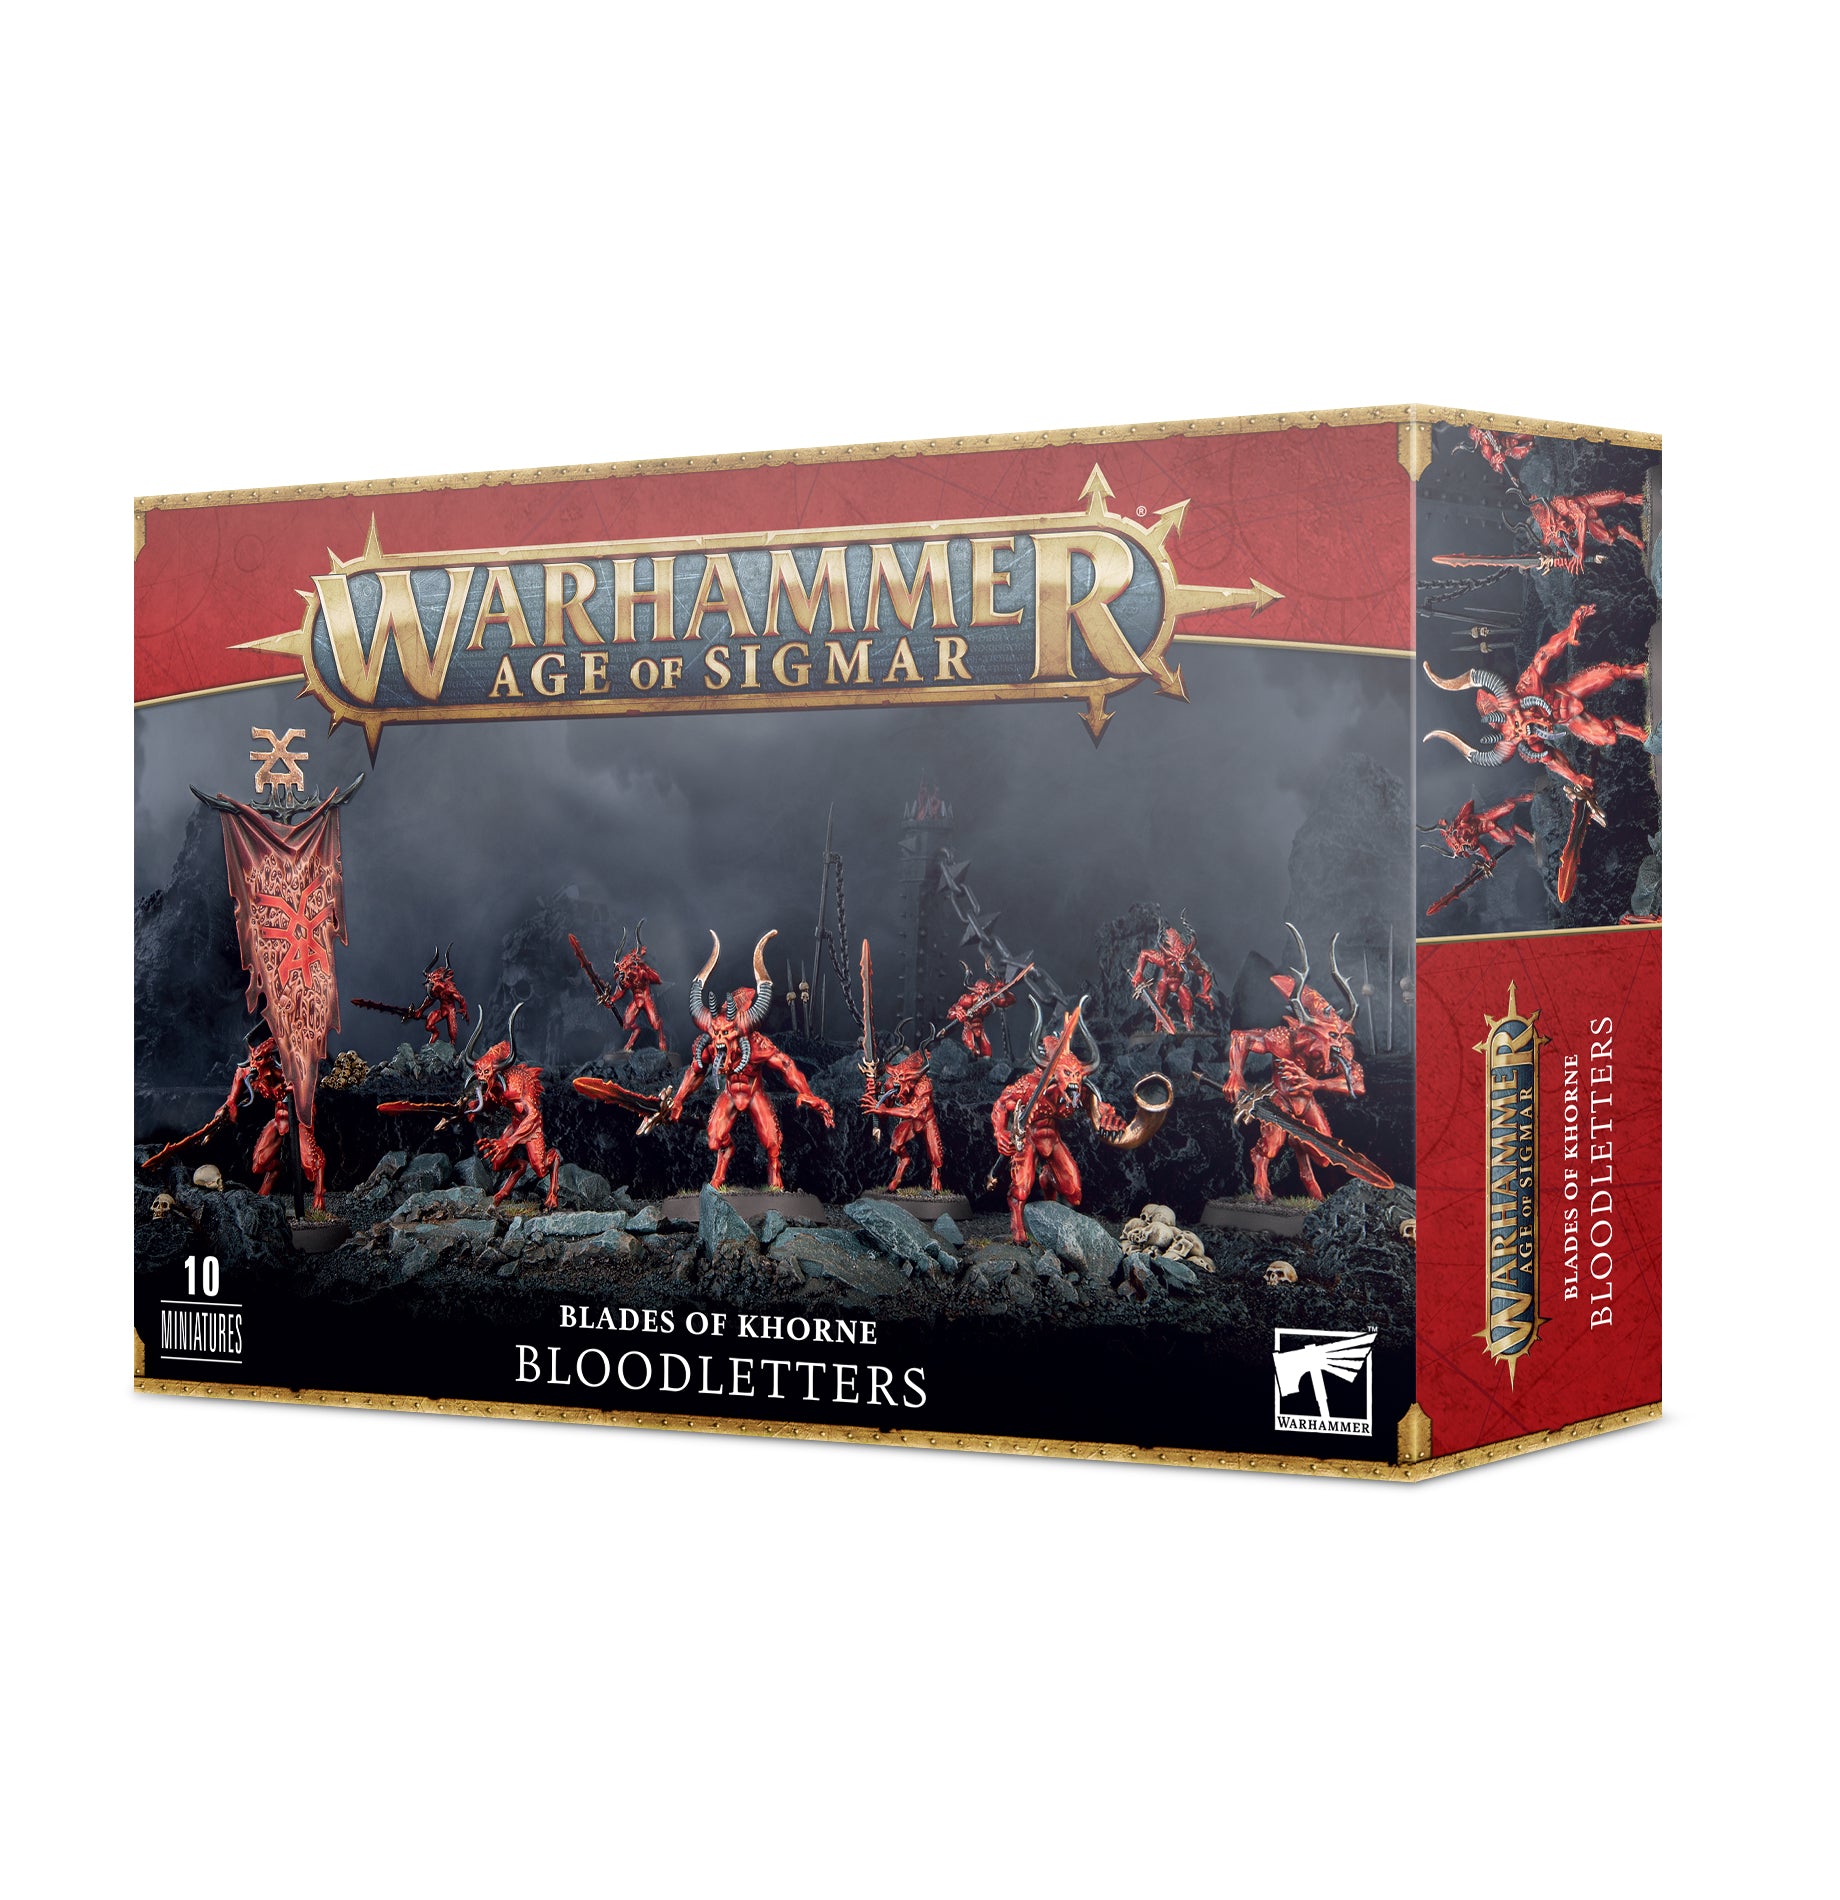 a box of warhammer age of sigmar blood elves